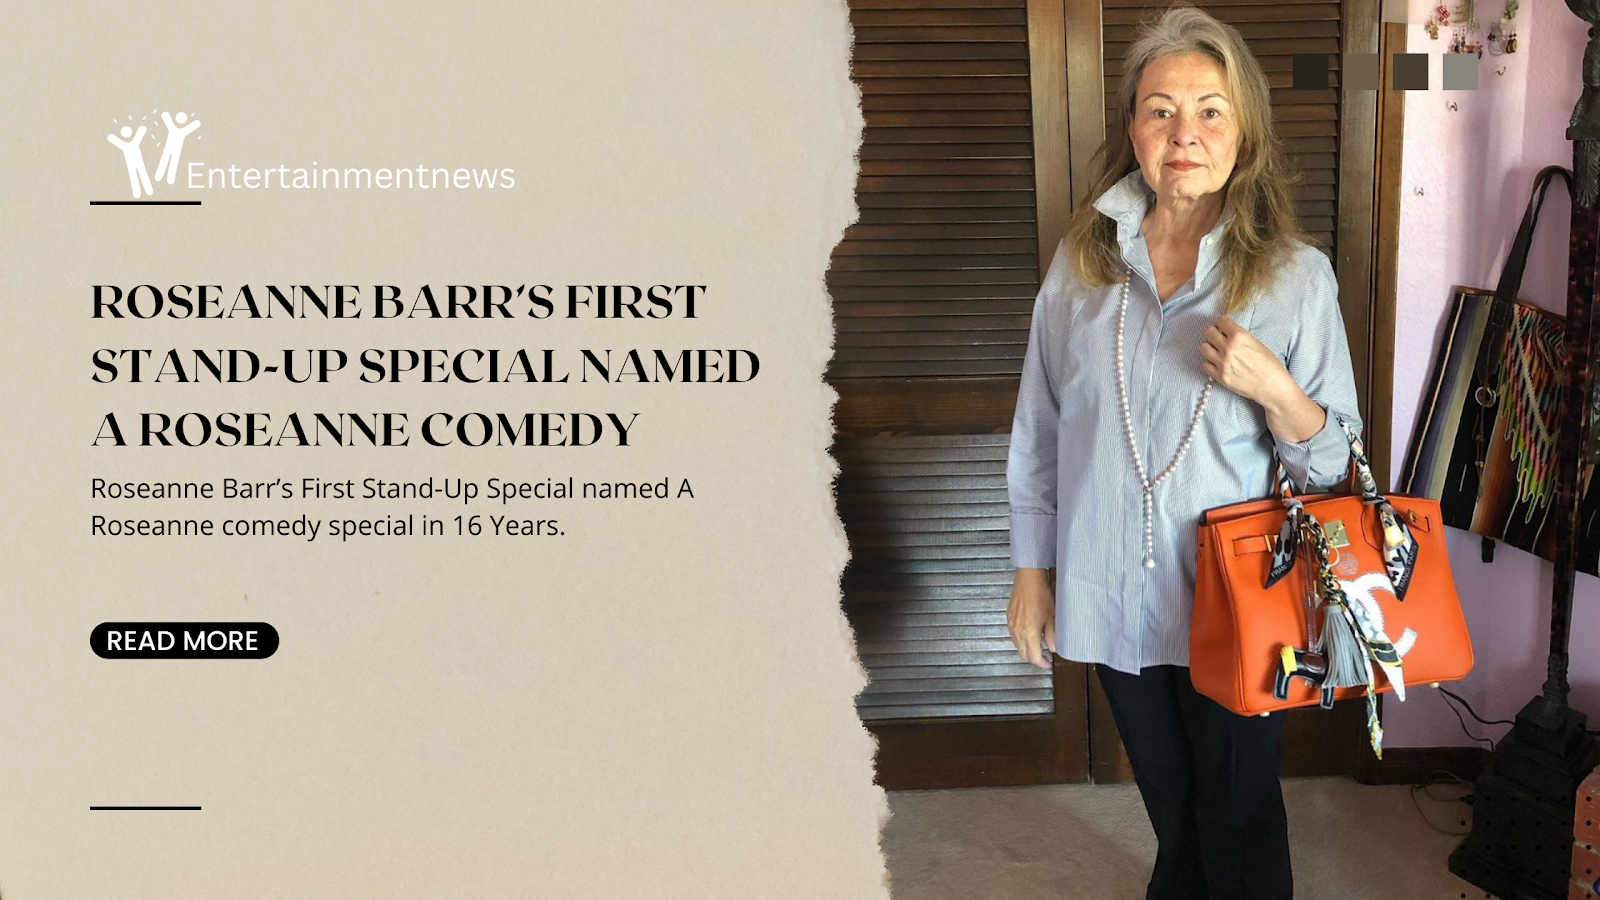 Roseanne Barr’s First Stand-Up Special named A Roseanne comedy special in 16 Years.